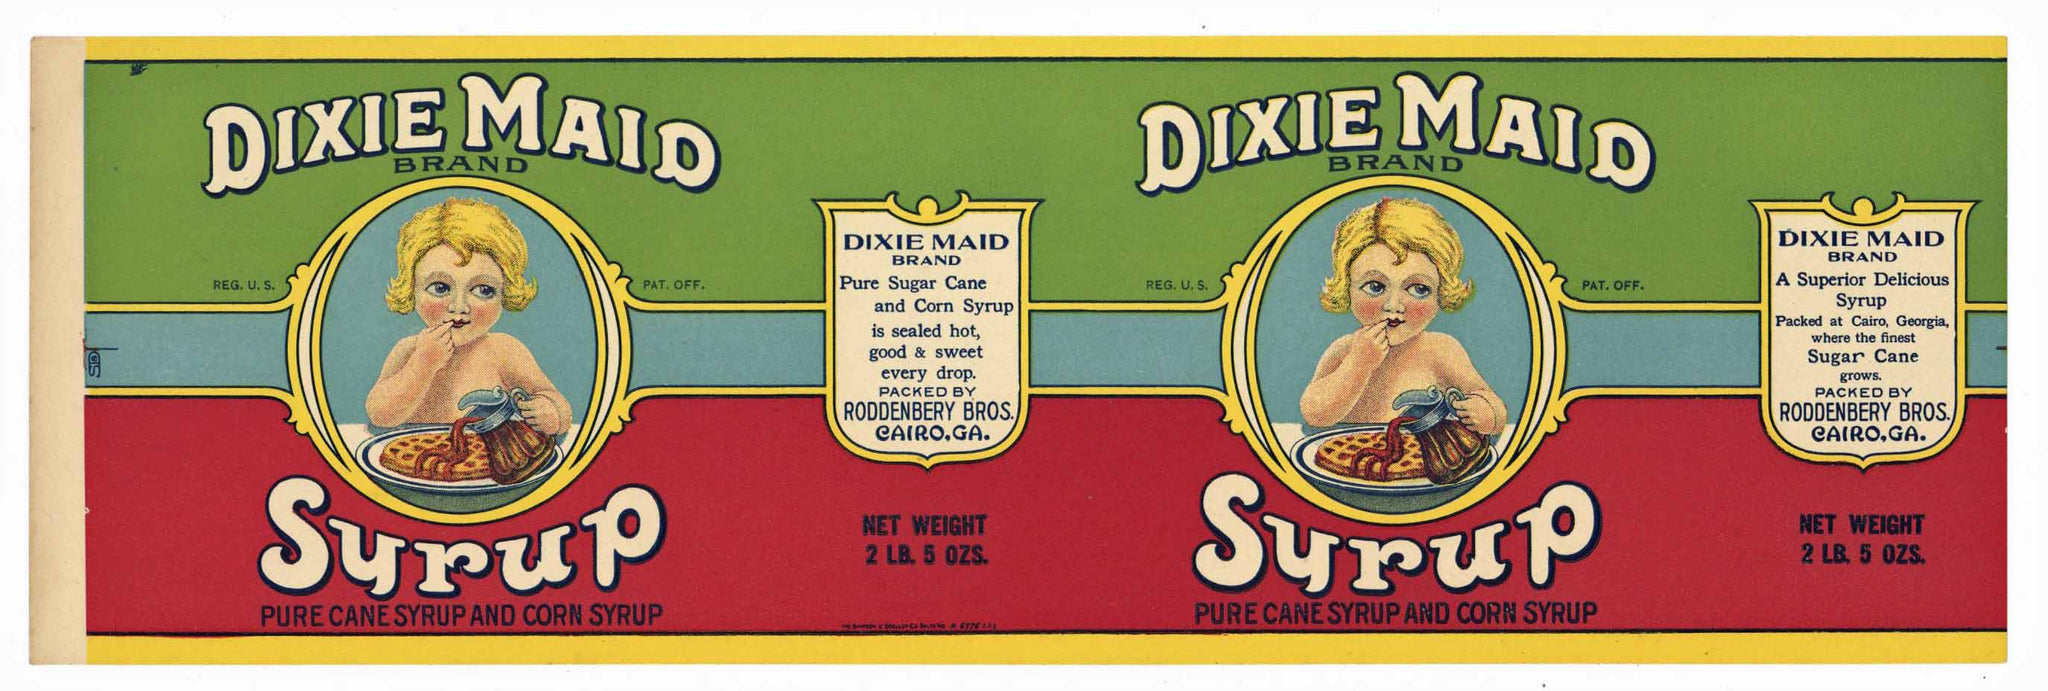 Dixie Maid Brand Vintage Georgia Cane Syrup Can Label